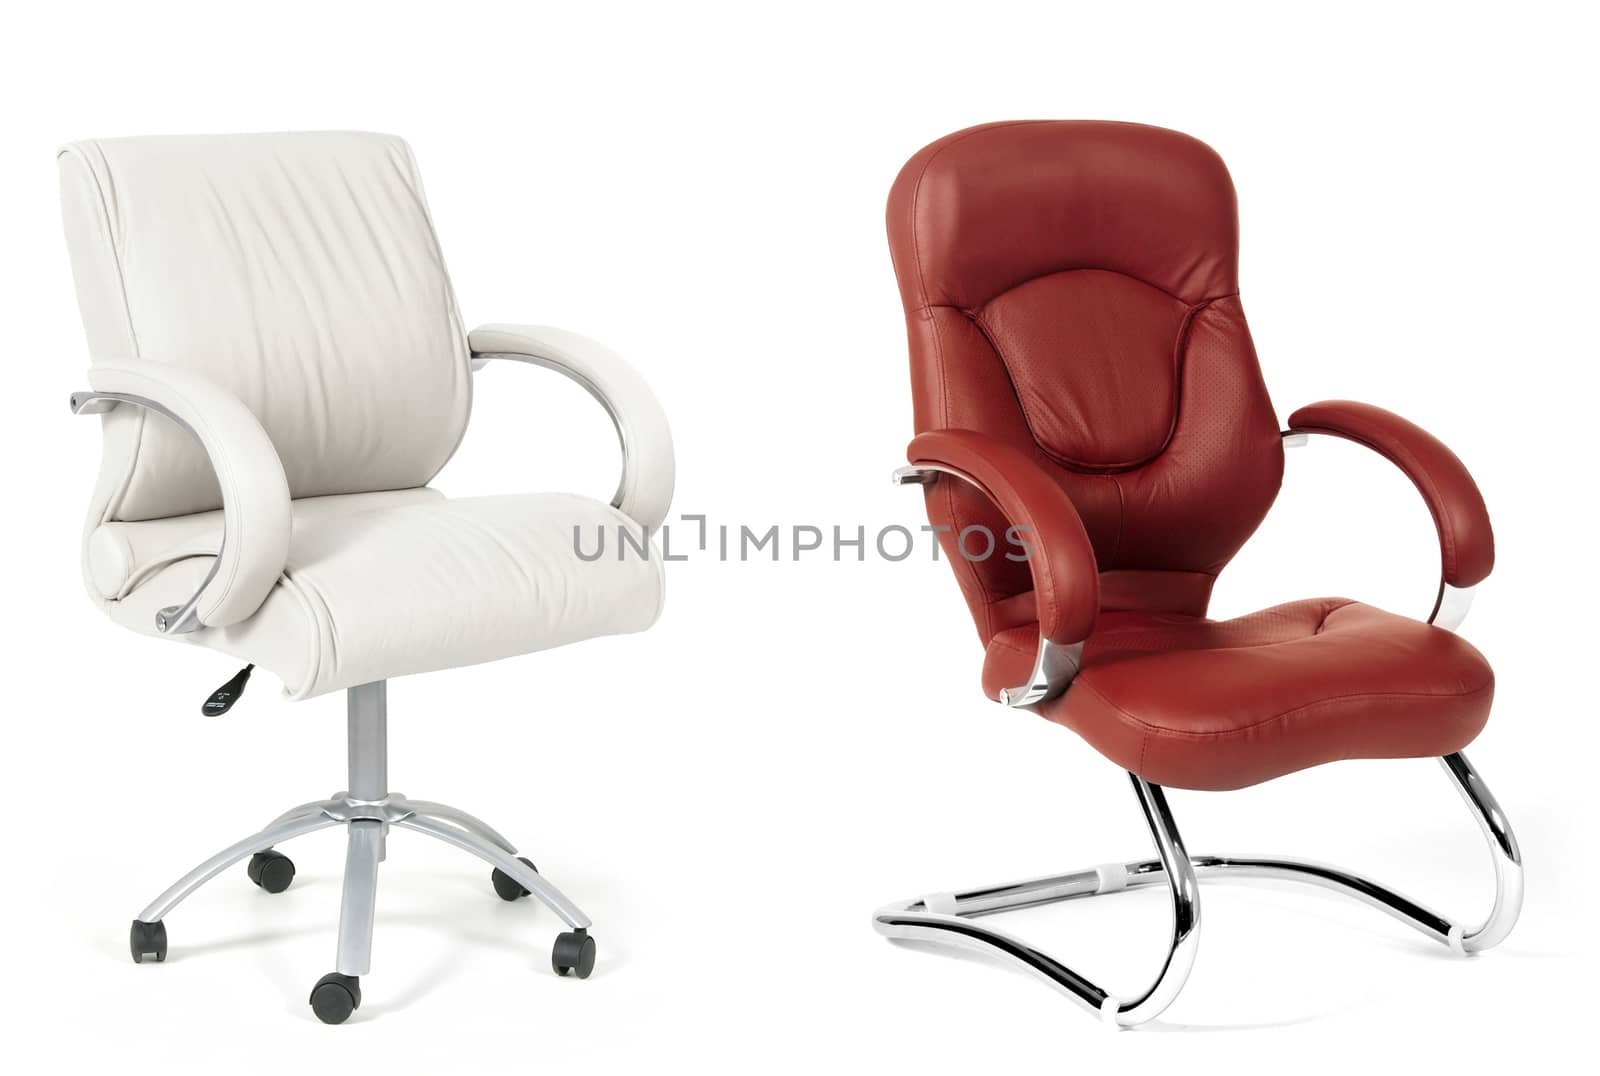 The office chairs from white and brown leather